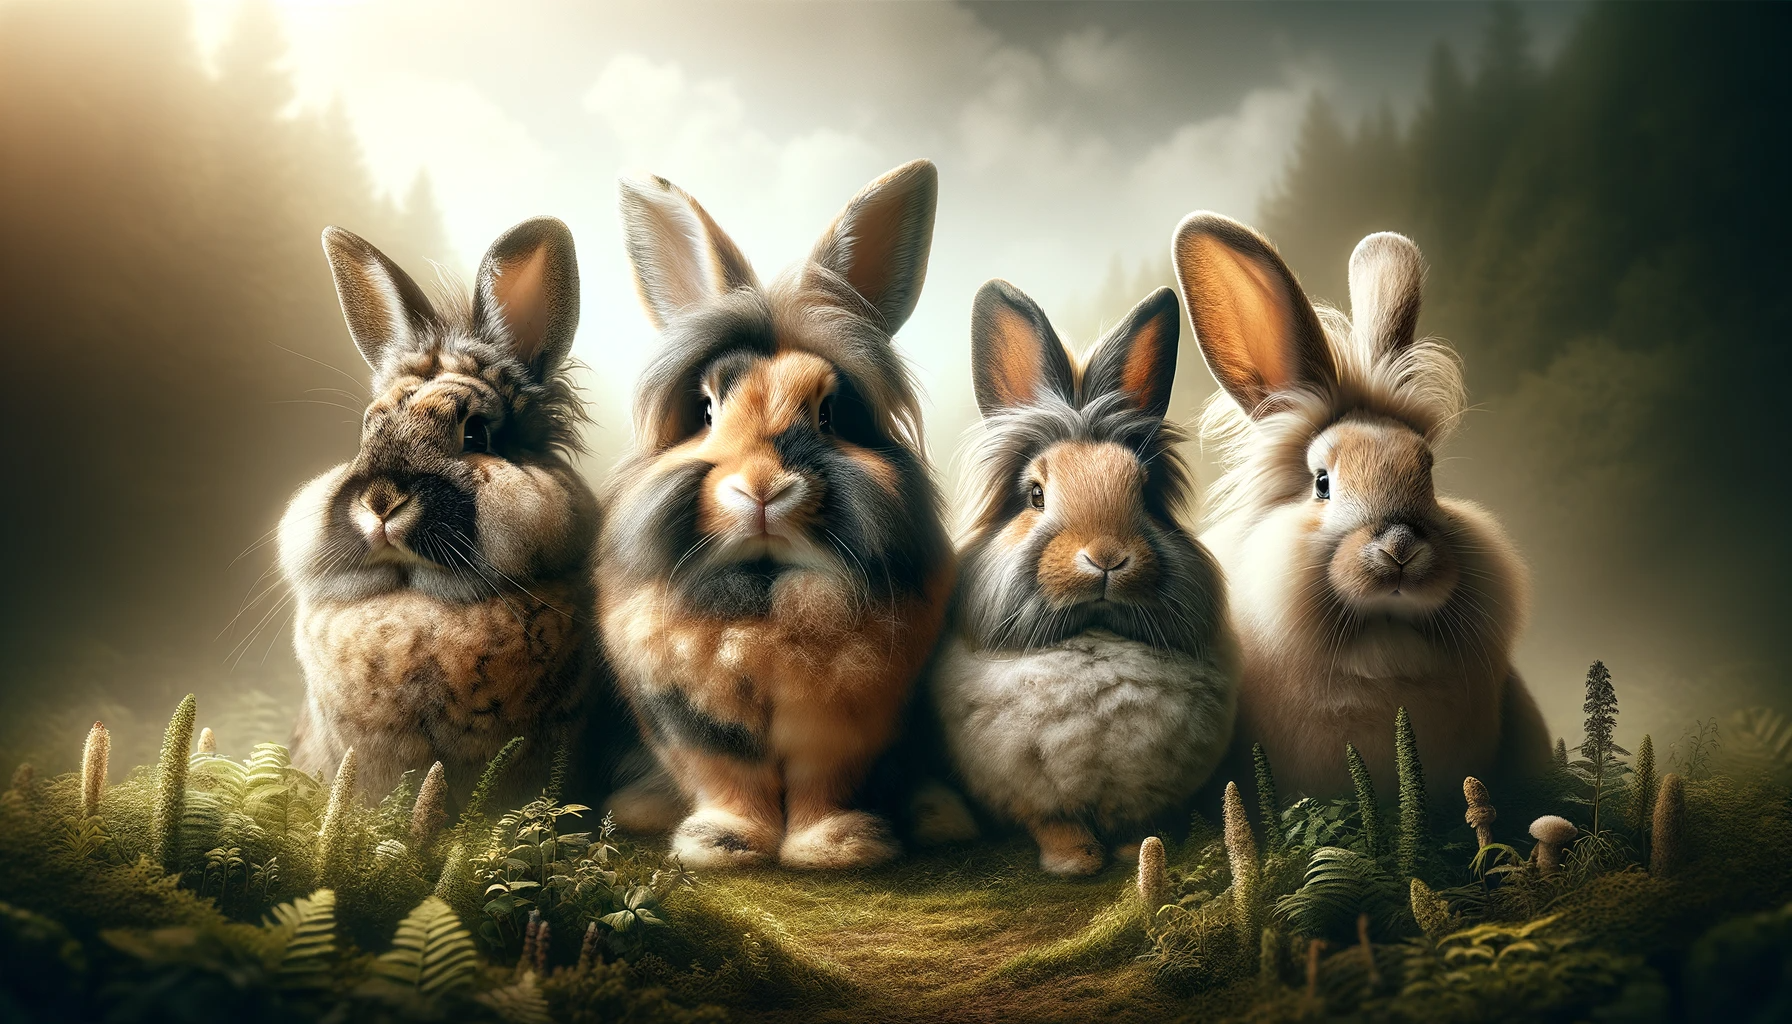 Rare Rabbit Breeds You've Probably Never Seen